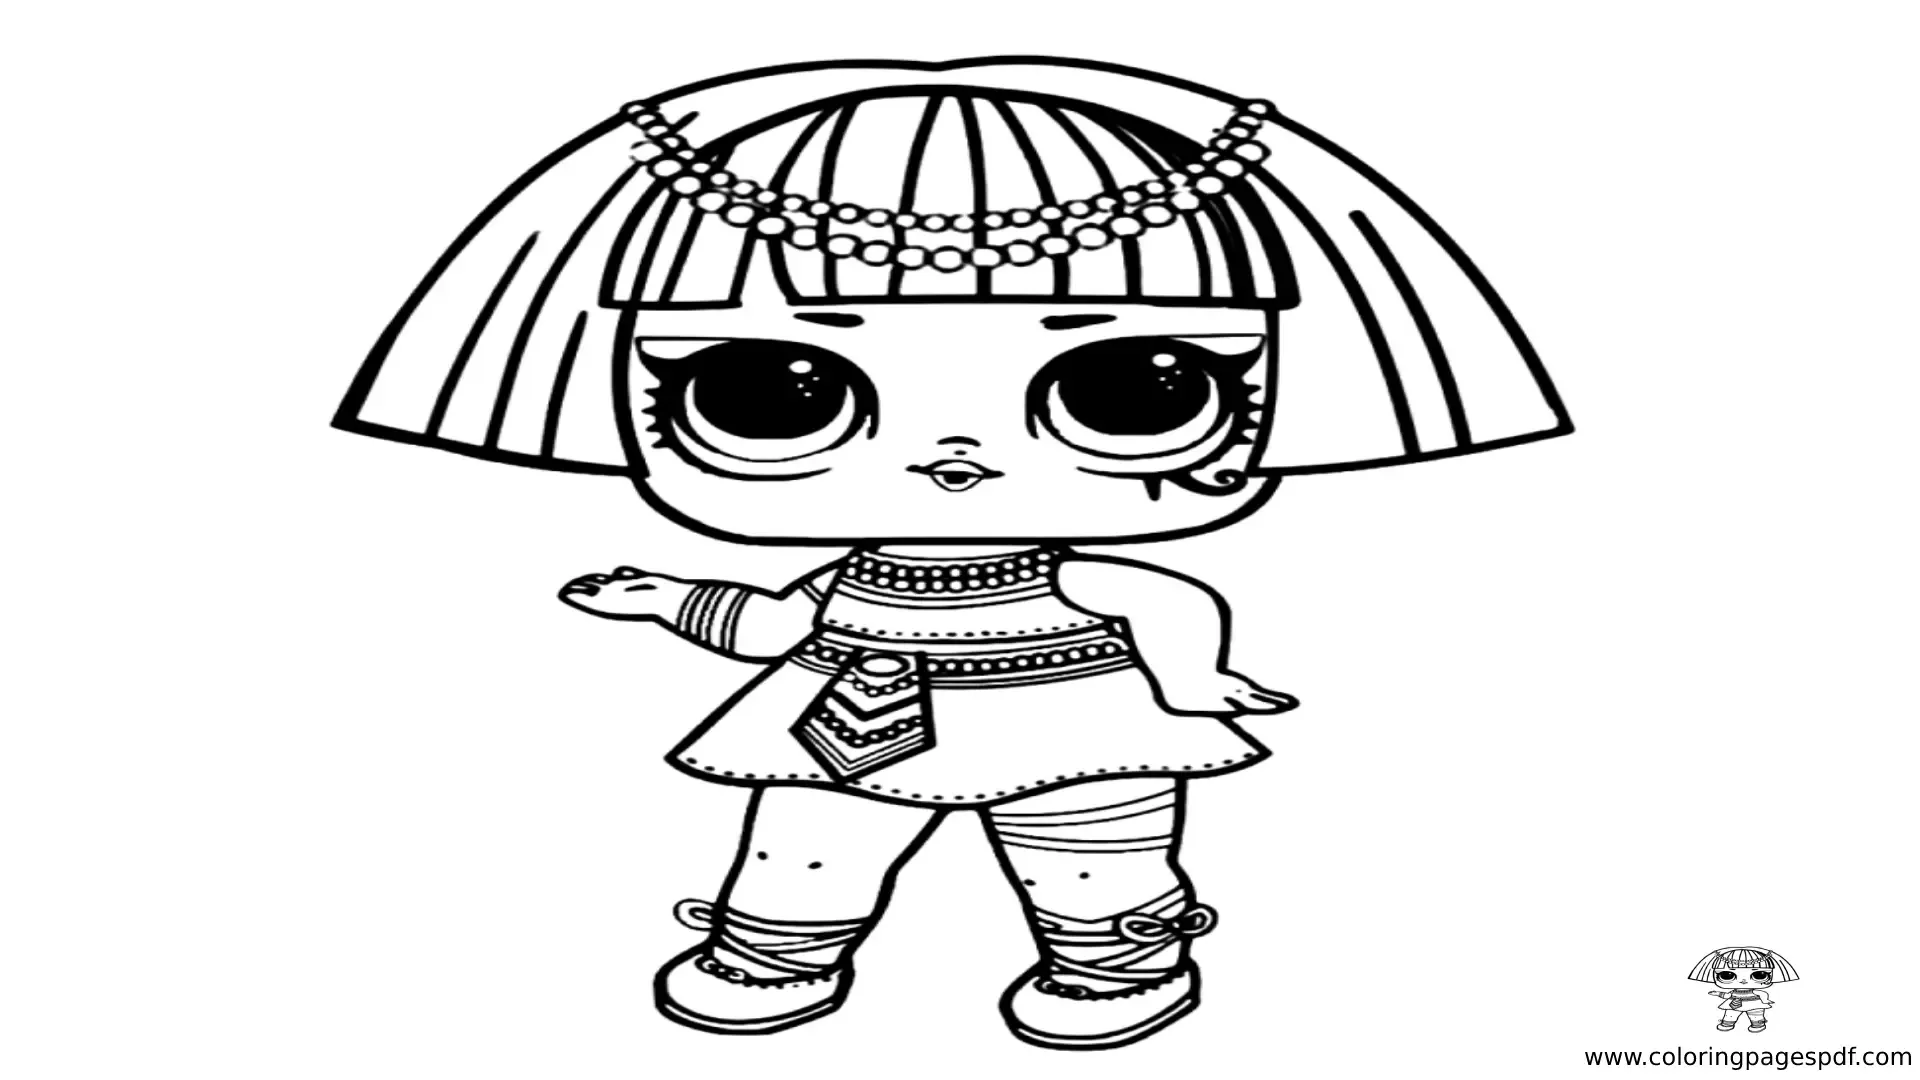 Coloring Pages Of Pharaoh Babe